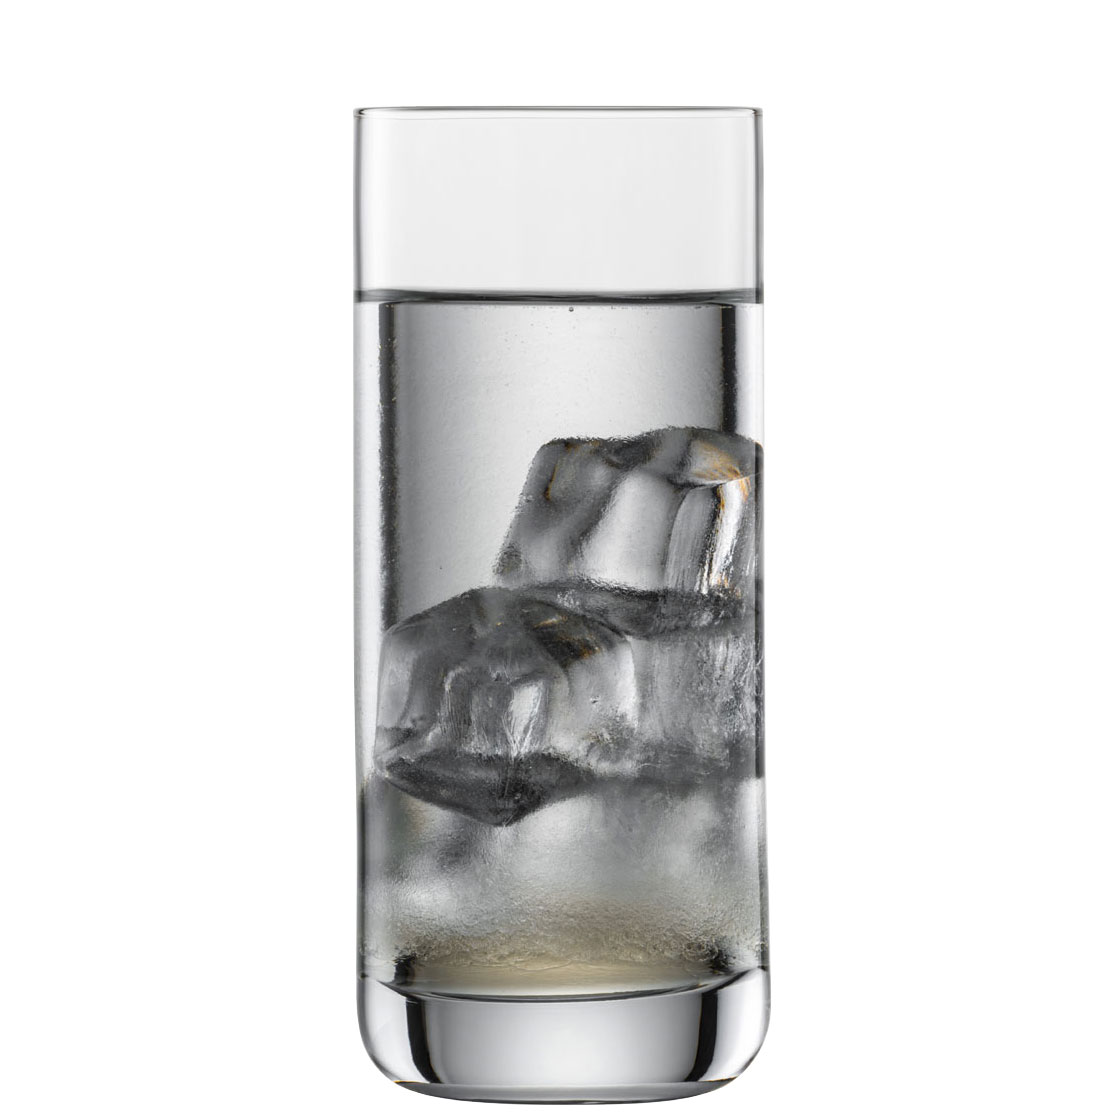 View more water glasses / tumblers from our Long drink & Tumblers range